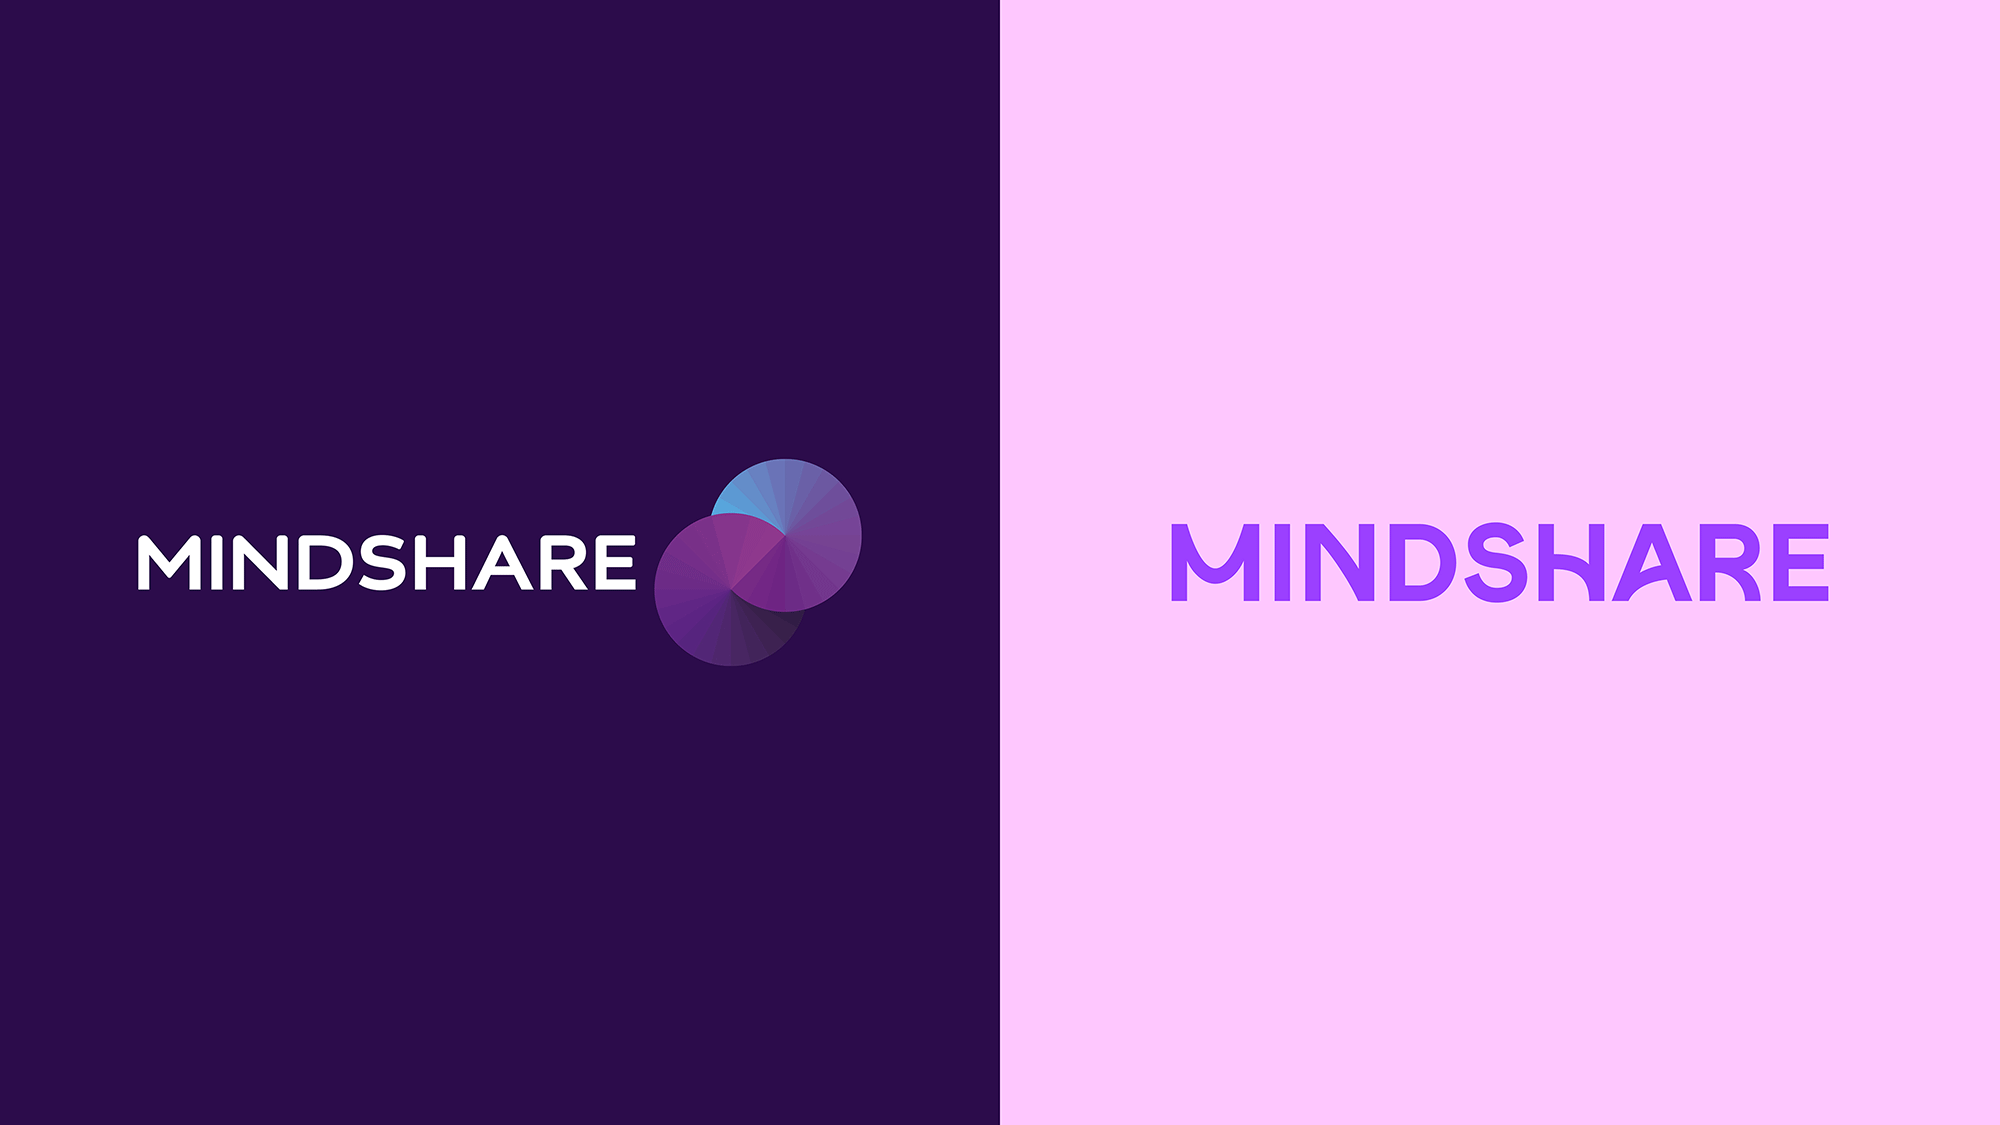 Brand New: New Logo and Identity for Mindshare by NB